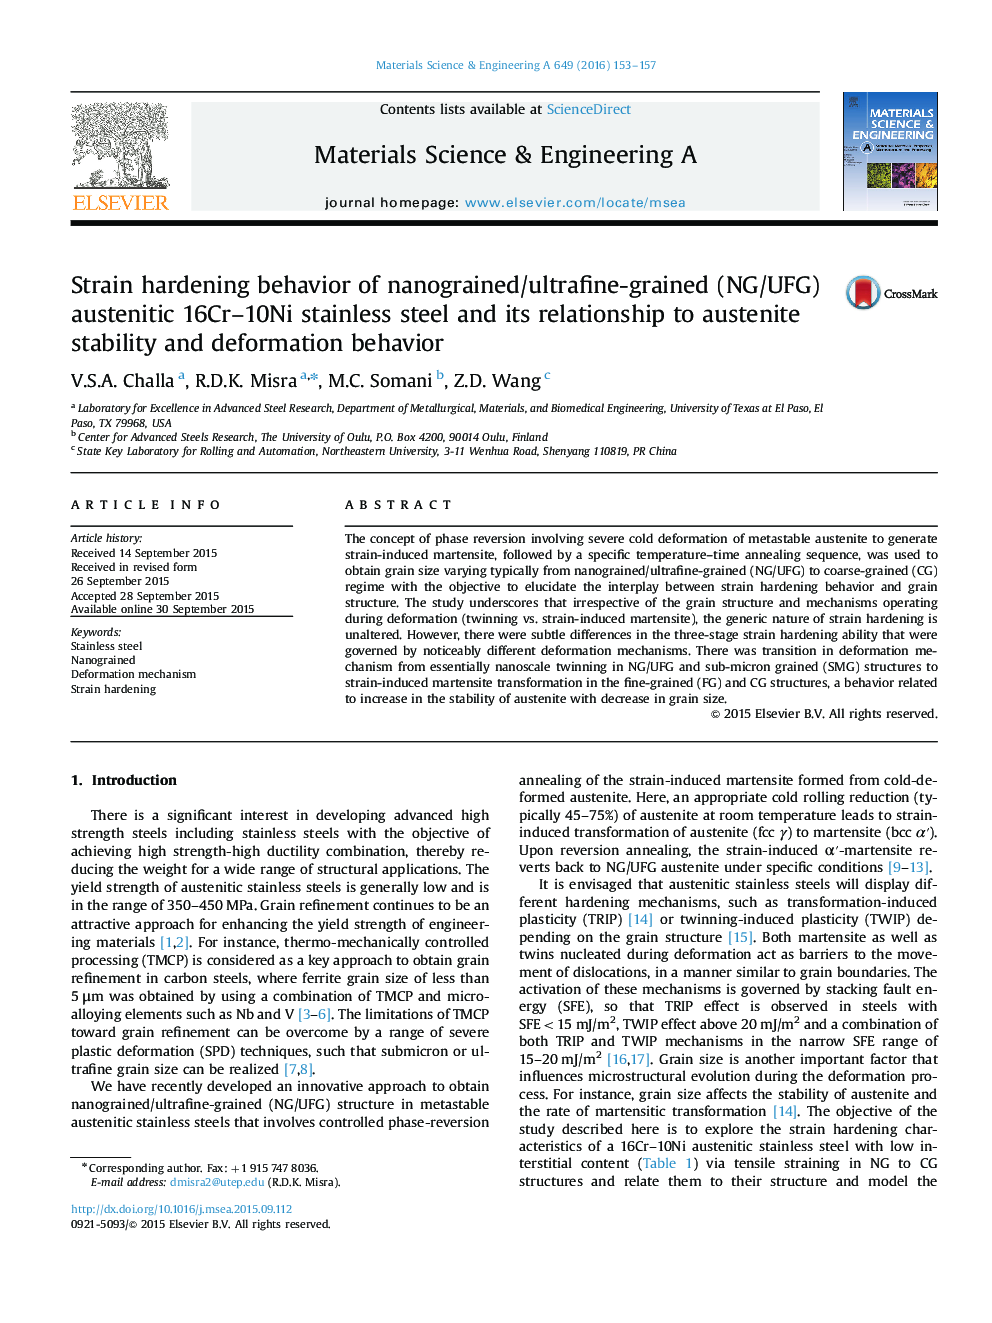 Strain hardening behavior of nanograined/ultrafine-grained (NG/UFG) austenitic 16Cr-10Ni stainless steel and its relationship to austenite stability and deformation behavior